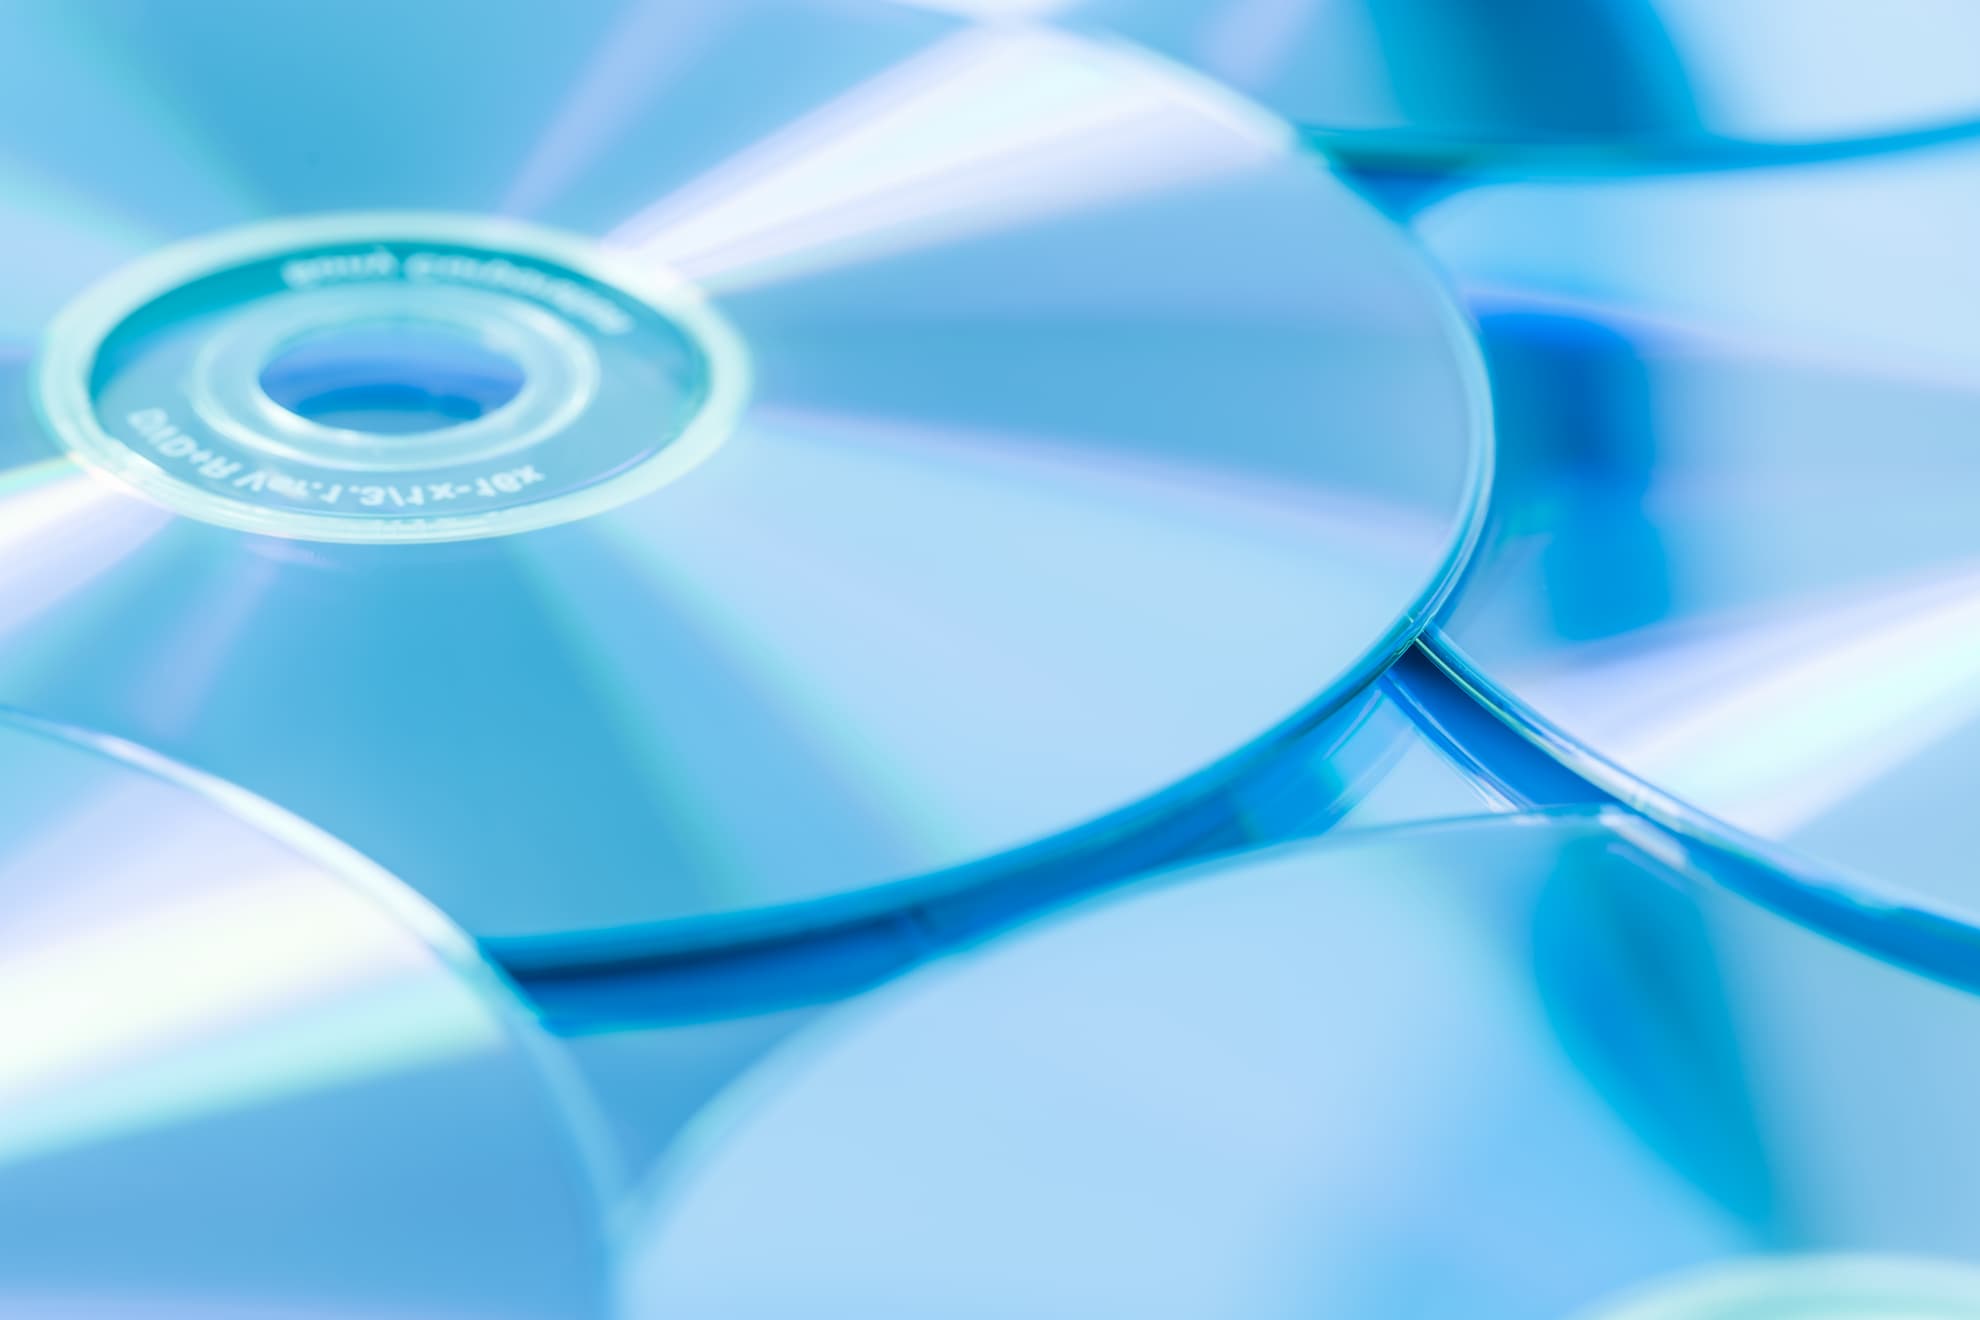 stack-of-cd-or-dvd-in-blue-tone-as-background-sof-2021-08-28-03-25-29-utc